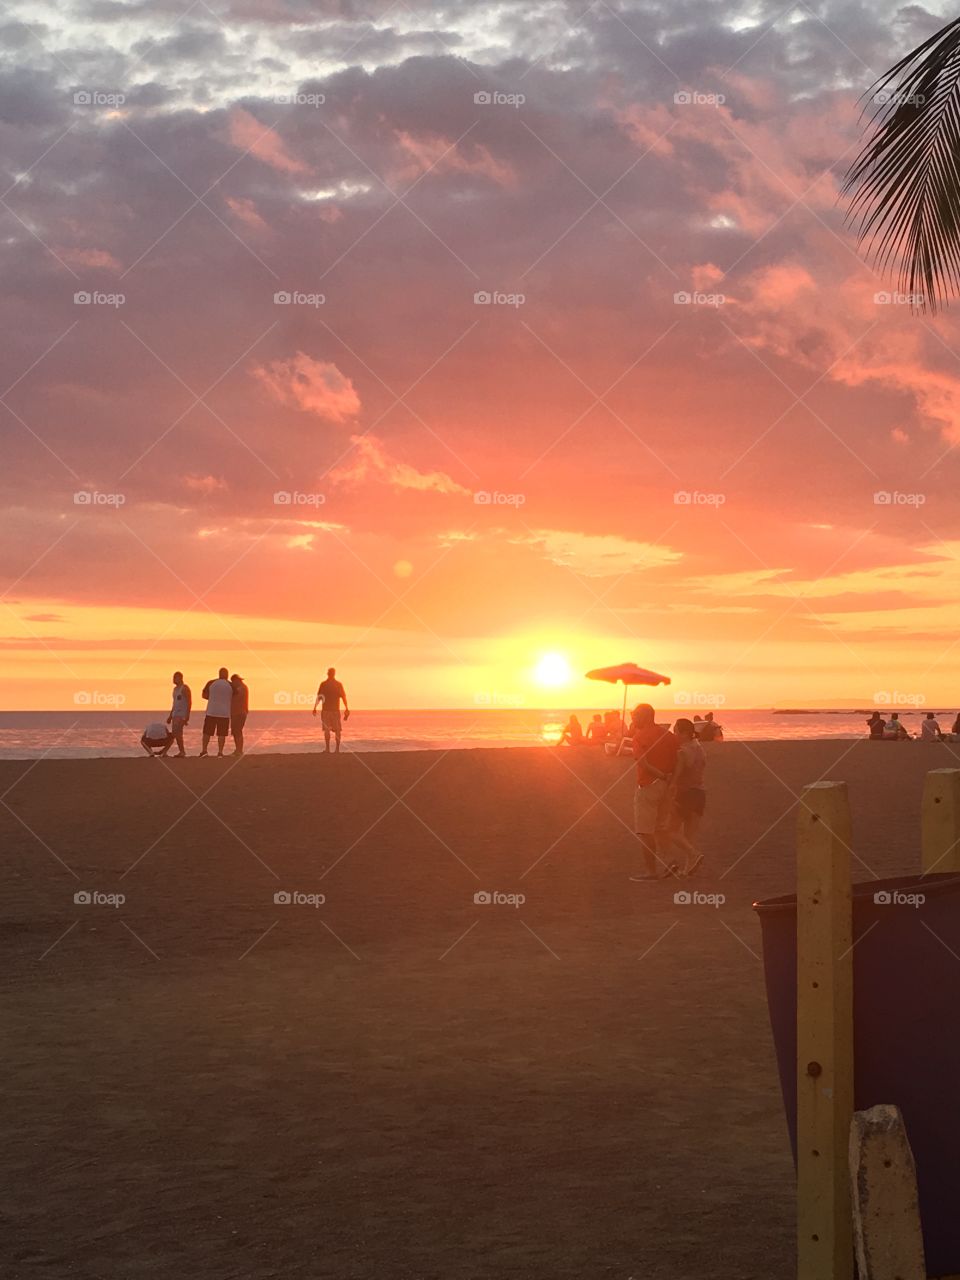 A sunset is to remind us that ending can also be beautiful and calming. Take a breath and relax watching a Costa Rican sunset at the beach.